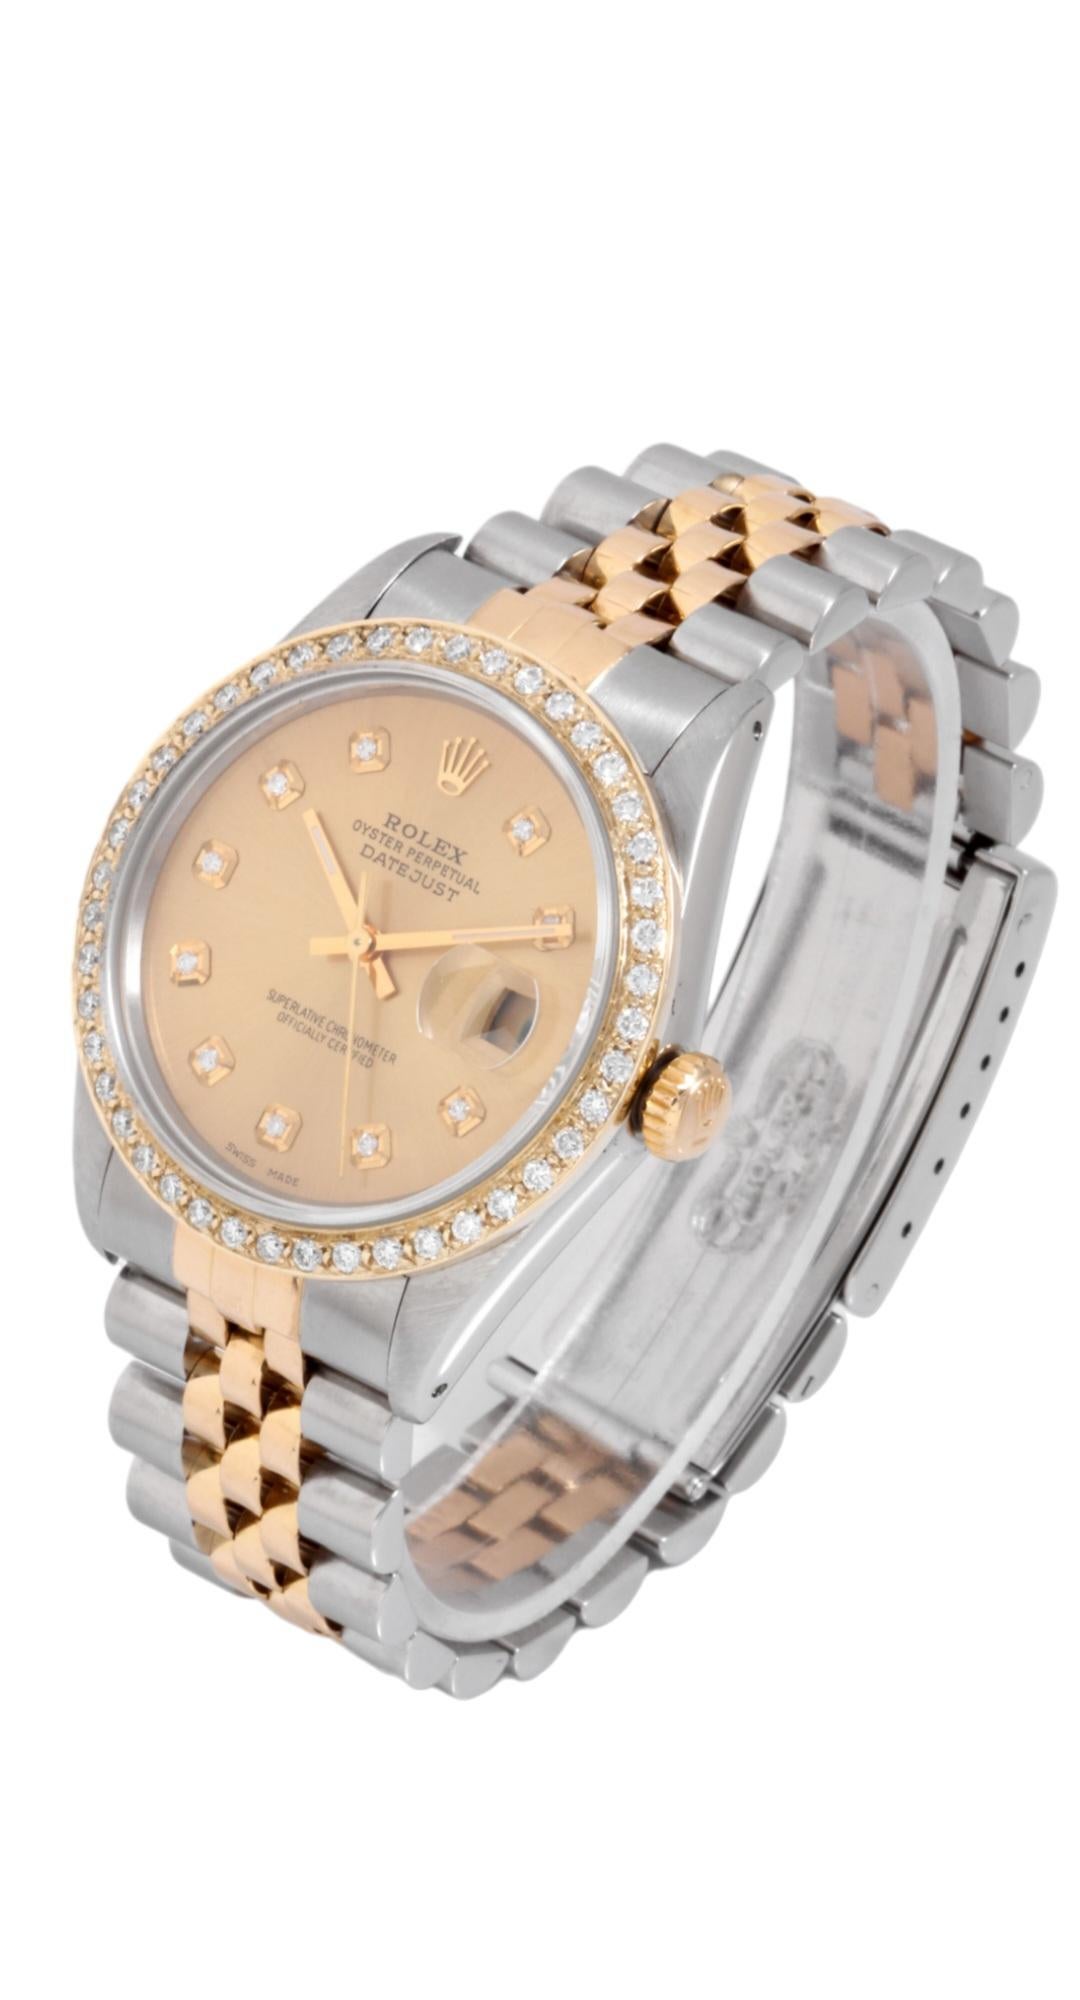 (Description)
Brand - Rolex
Case size - 36mm
Style - Datejust 
Model - 16013
Crystal - Sapphire
Metals - Yellow gold/steel 
Bezel - Yellow gold diamond
Dial - Champagne Diamond
Movement - Rolex auto CAL-3035
Band - Rolex two tone jubilee

3 years in